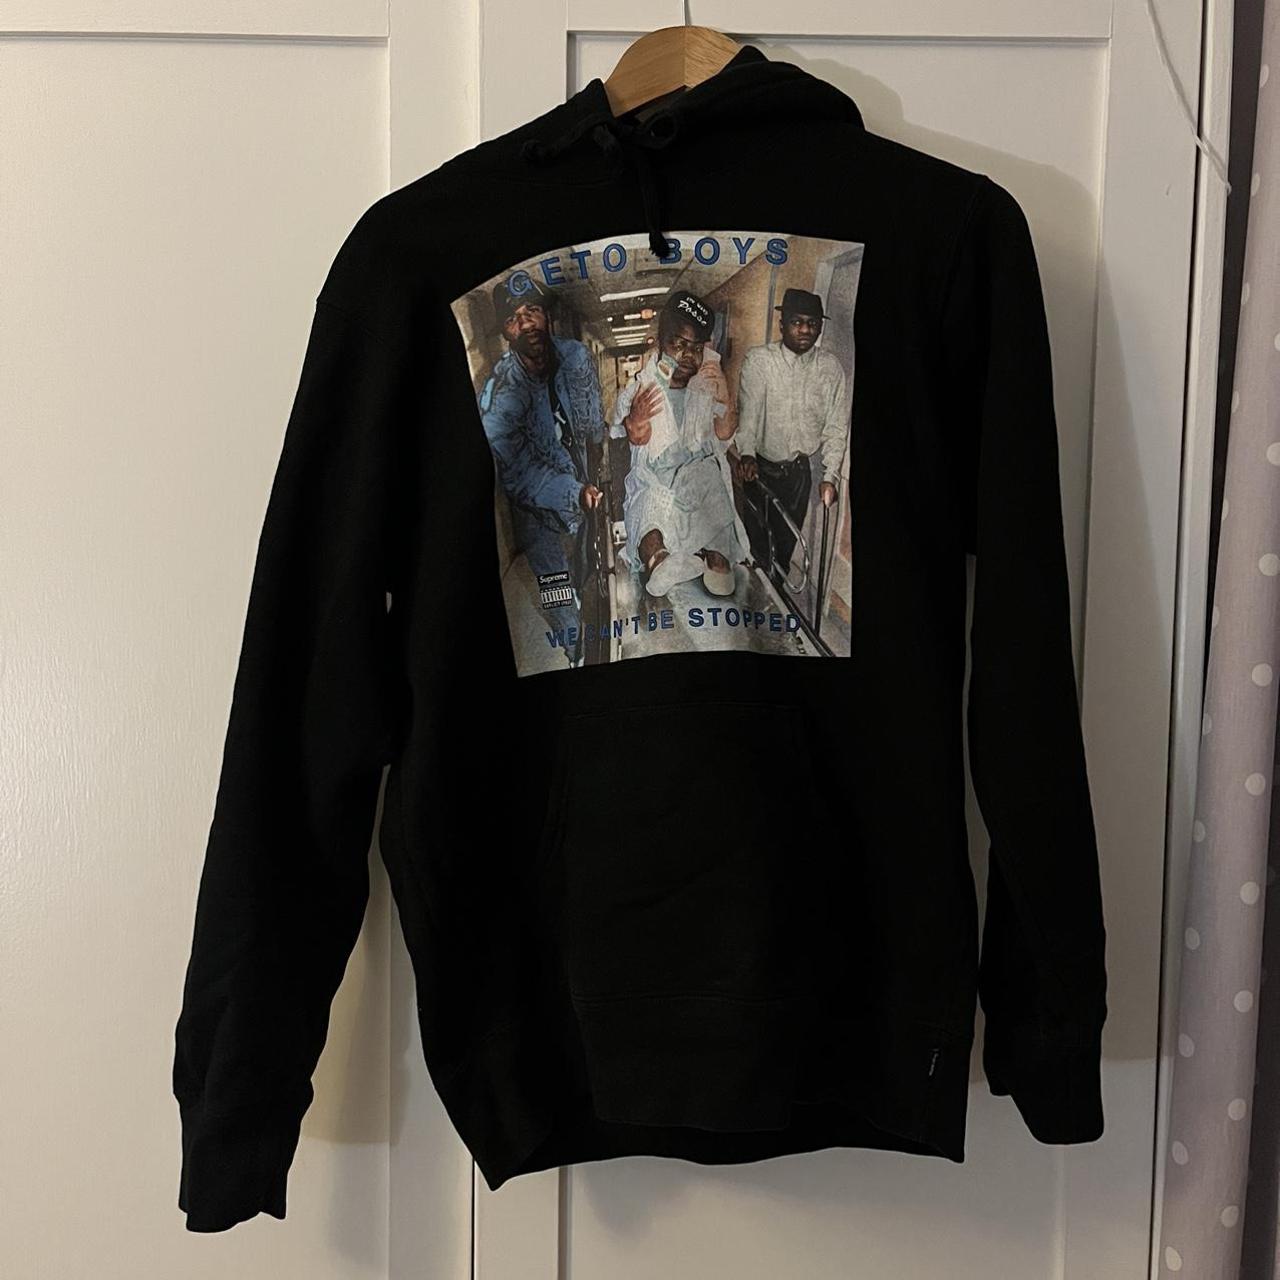 Supreme Geto Boys ‘WE CAN’T BE STOPPED’ black... - Depop